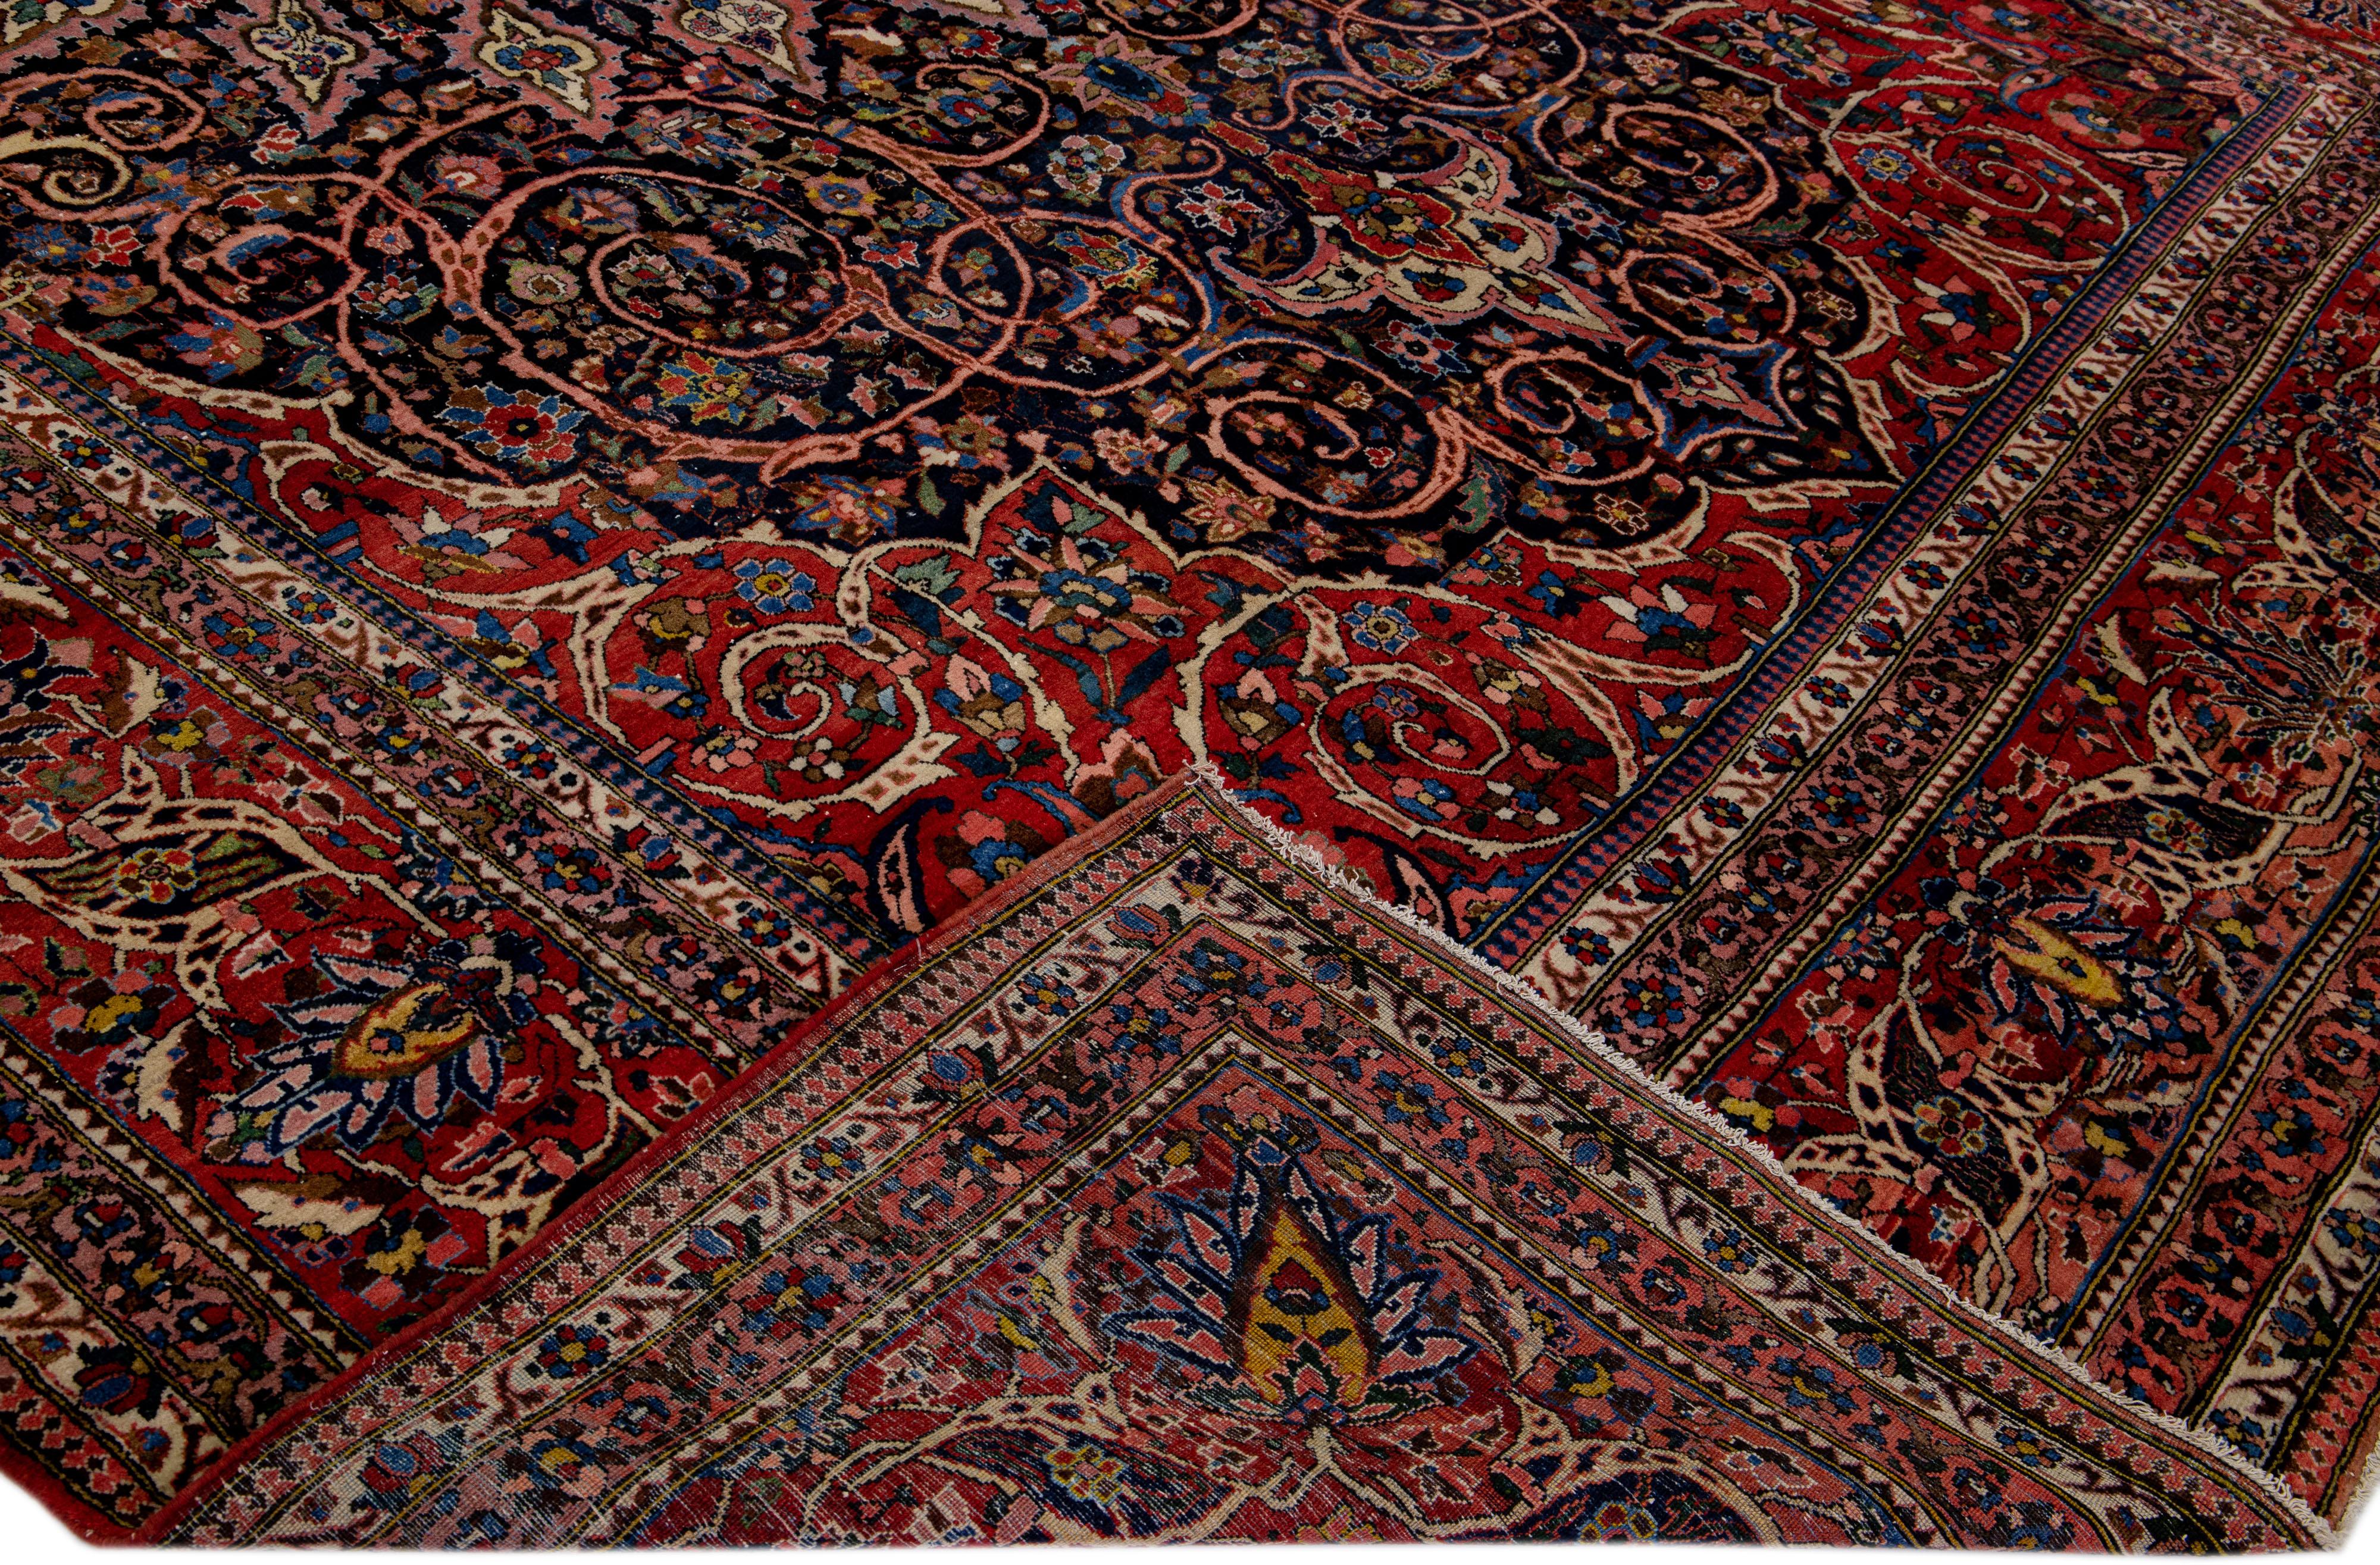 Beautiful Antique Bakhtiari hand-knotted wool rug with a red field. This Persian piece has all-over bright accent colors in a gorgeous r classic rosette design.

This rug measures 11'9